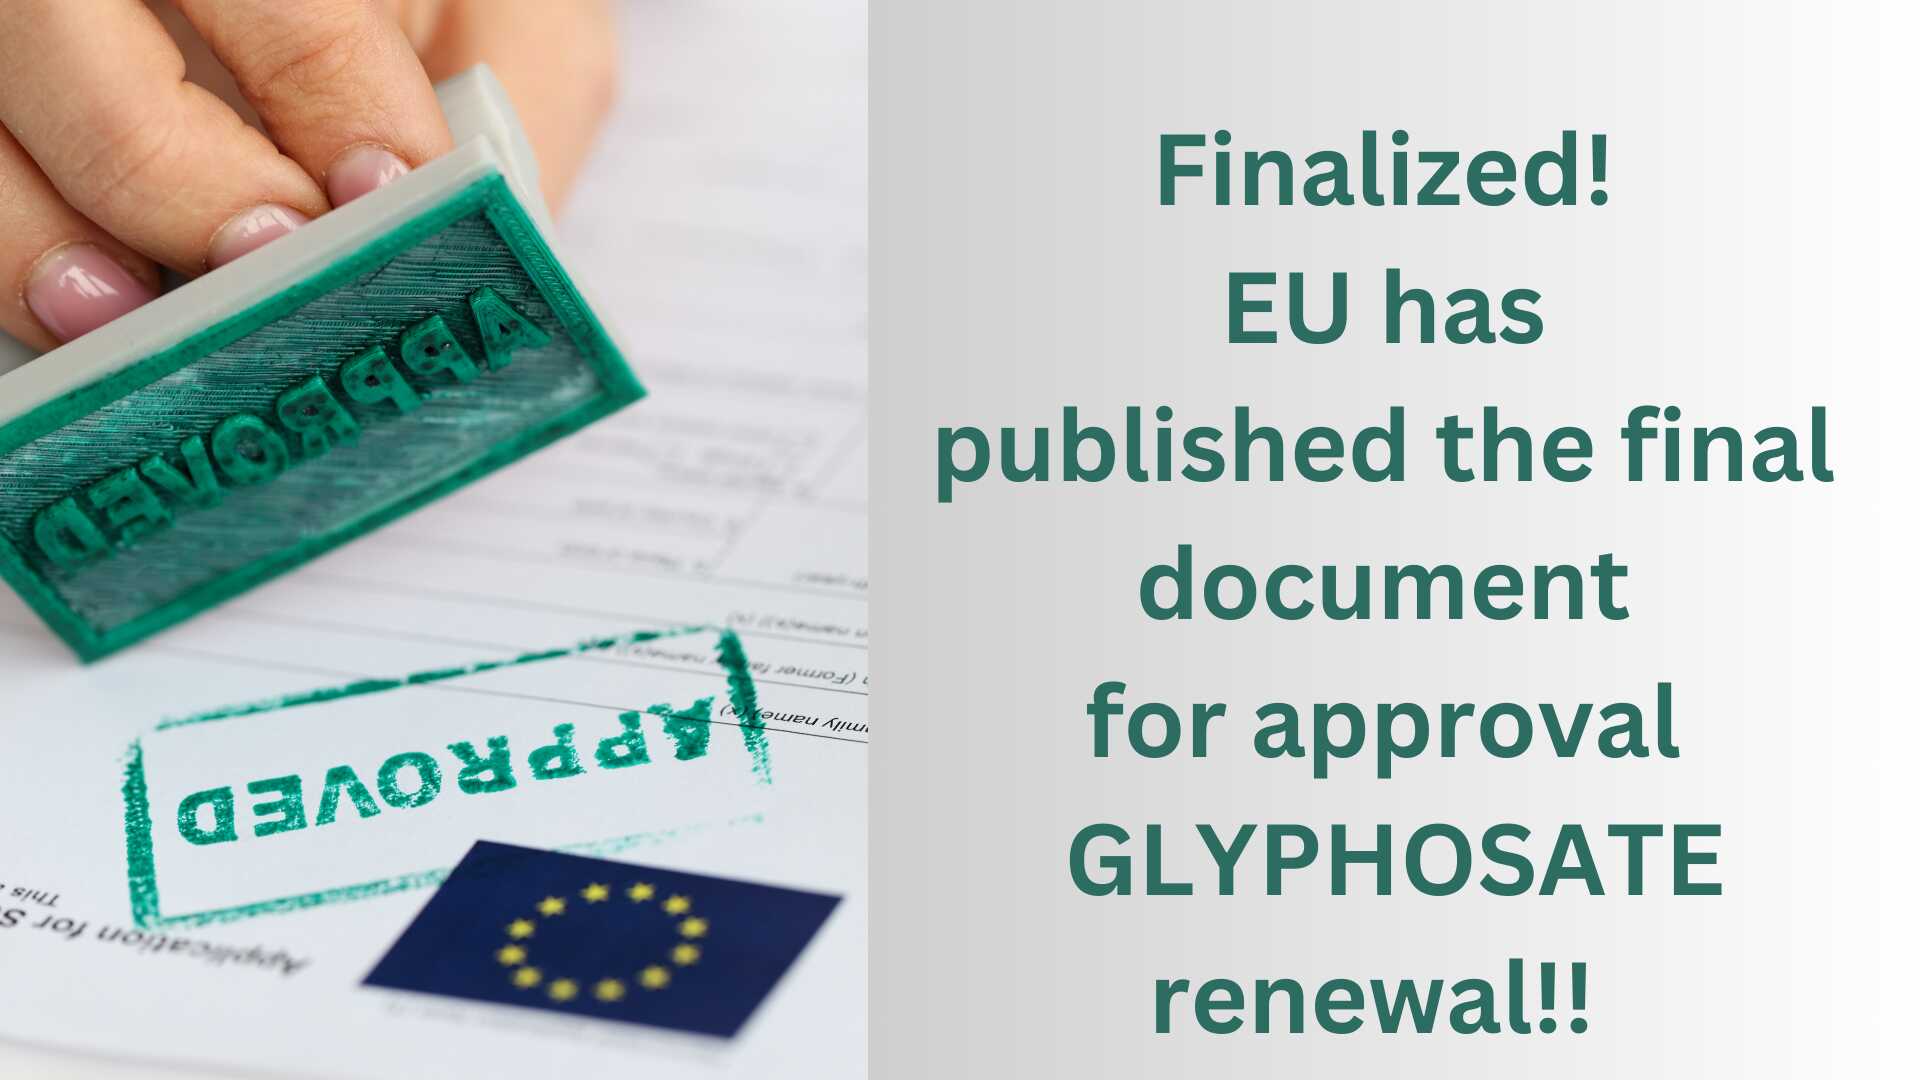 EU PUBLISHED THE FINAL DOCUMENT ON RENEWING THE APPROVAL OF THE ACTIVE SUBSTANCE GLYPHOSATE